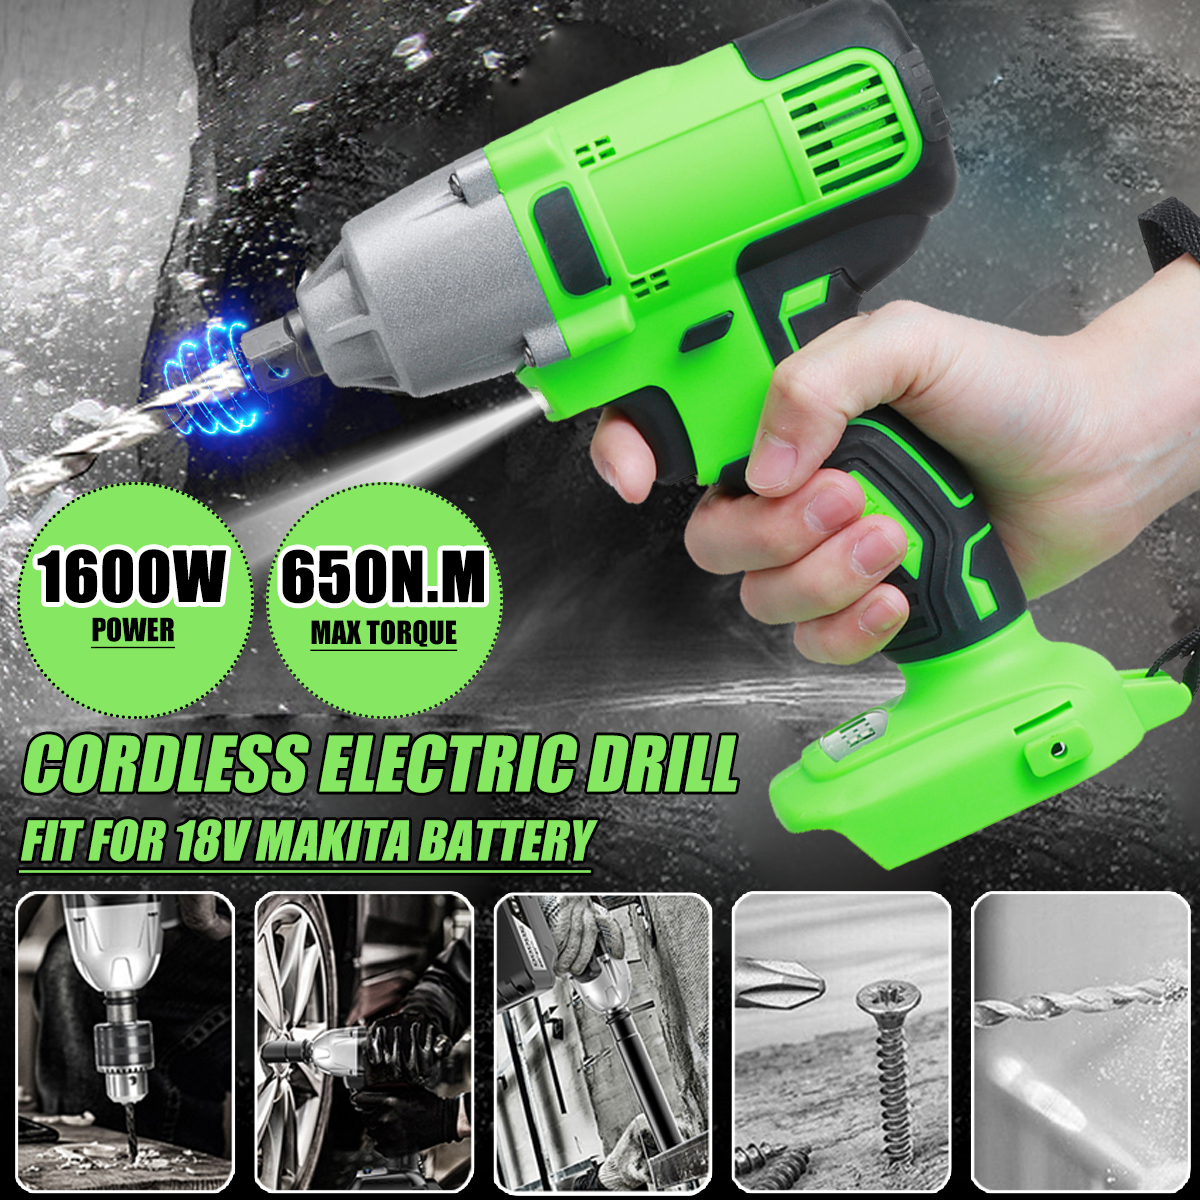 650NM-1600W-Brushless-Cordless-Electric-Drill-Screwdriver-For-Makita-18V-Battety-1783492-2